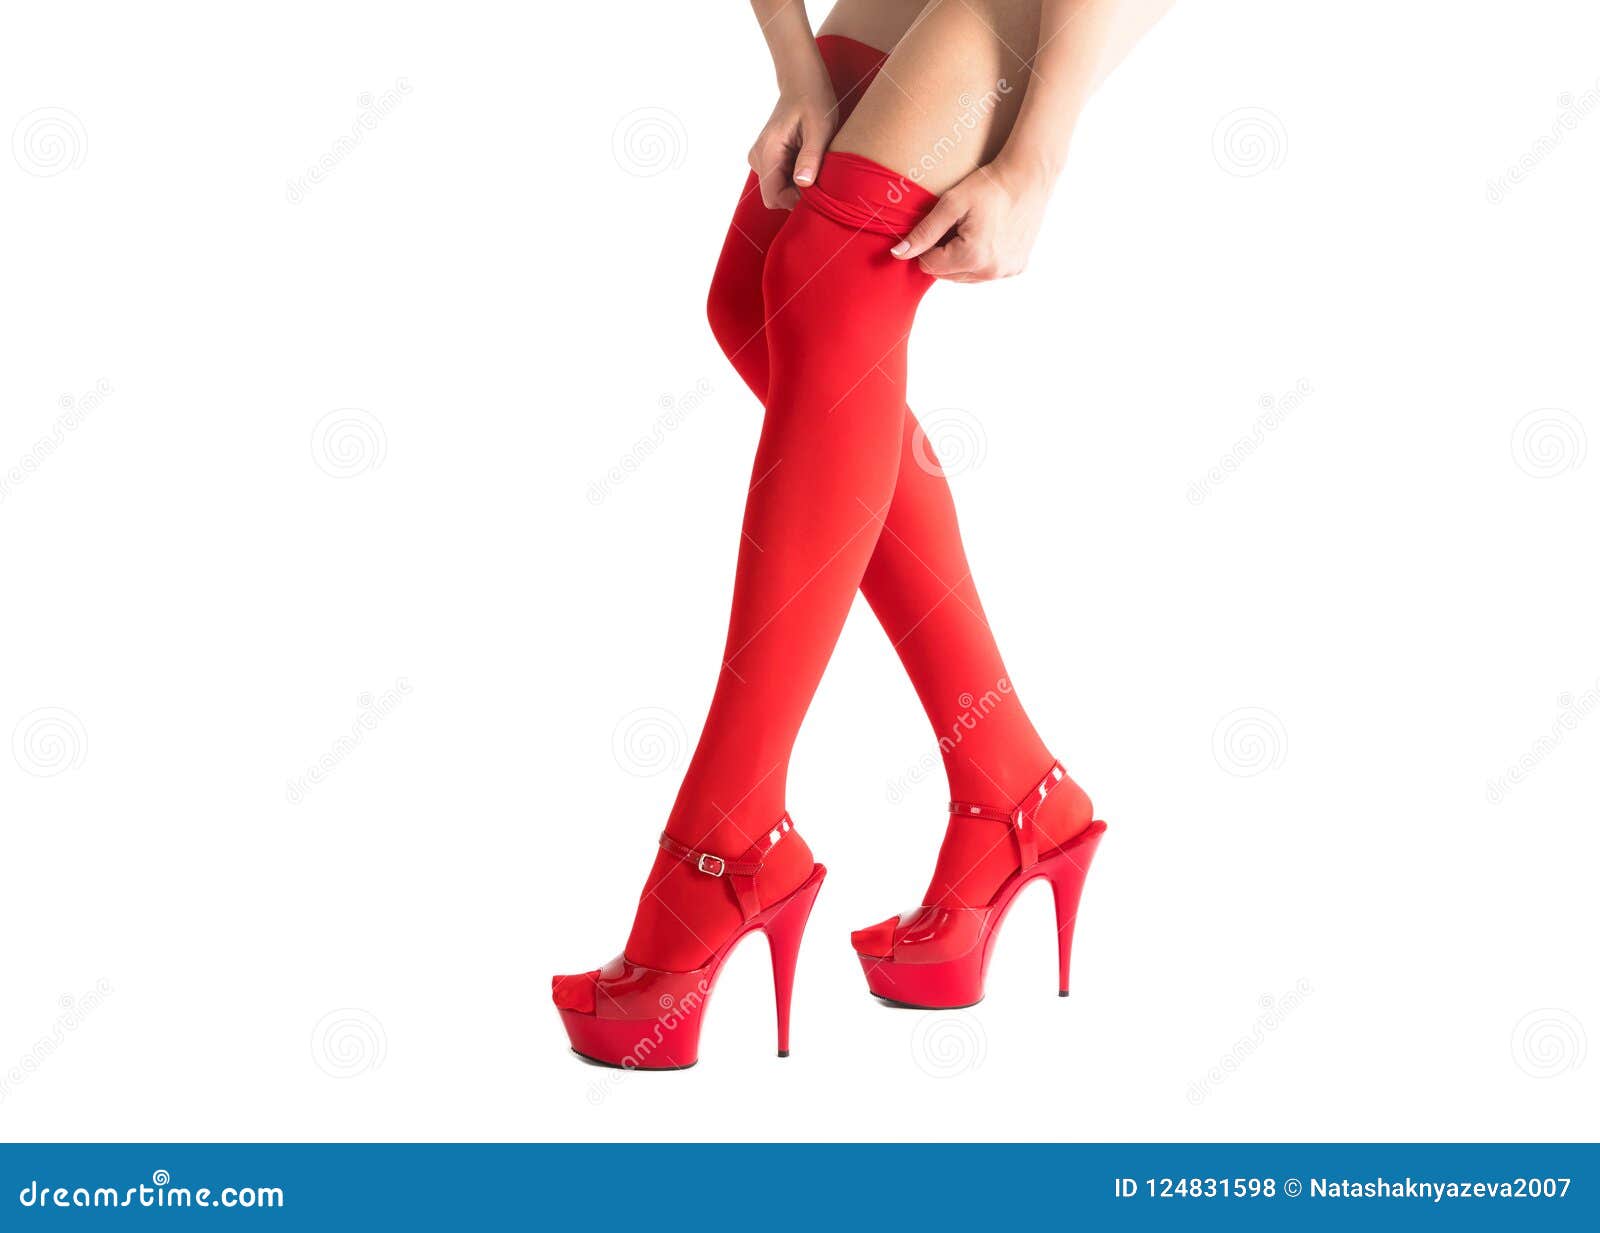 demonstration of high heels in red stockings